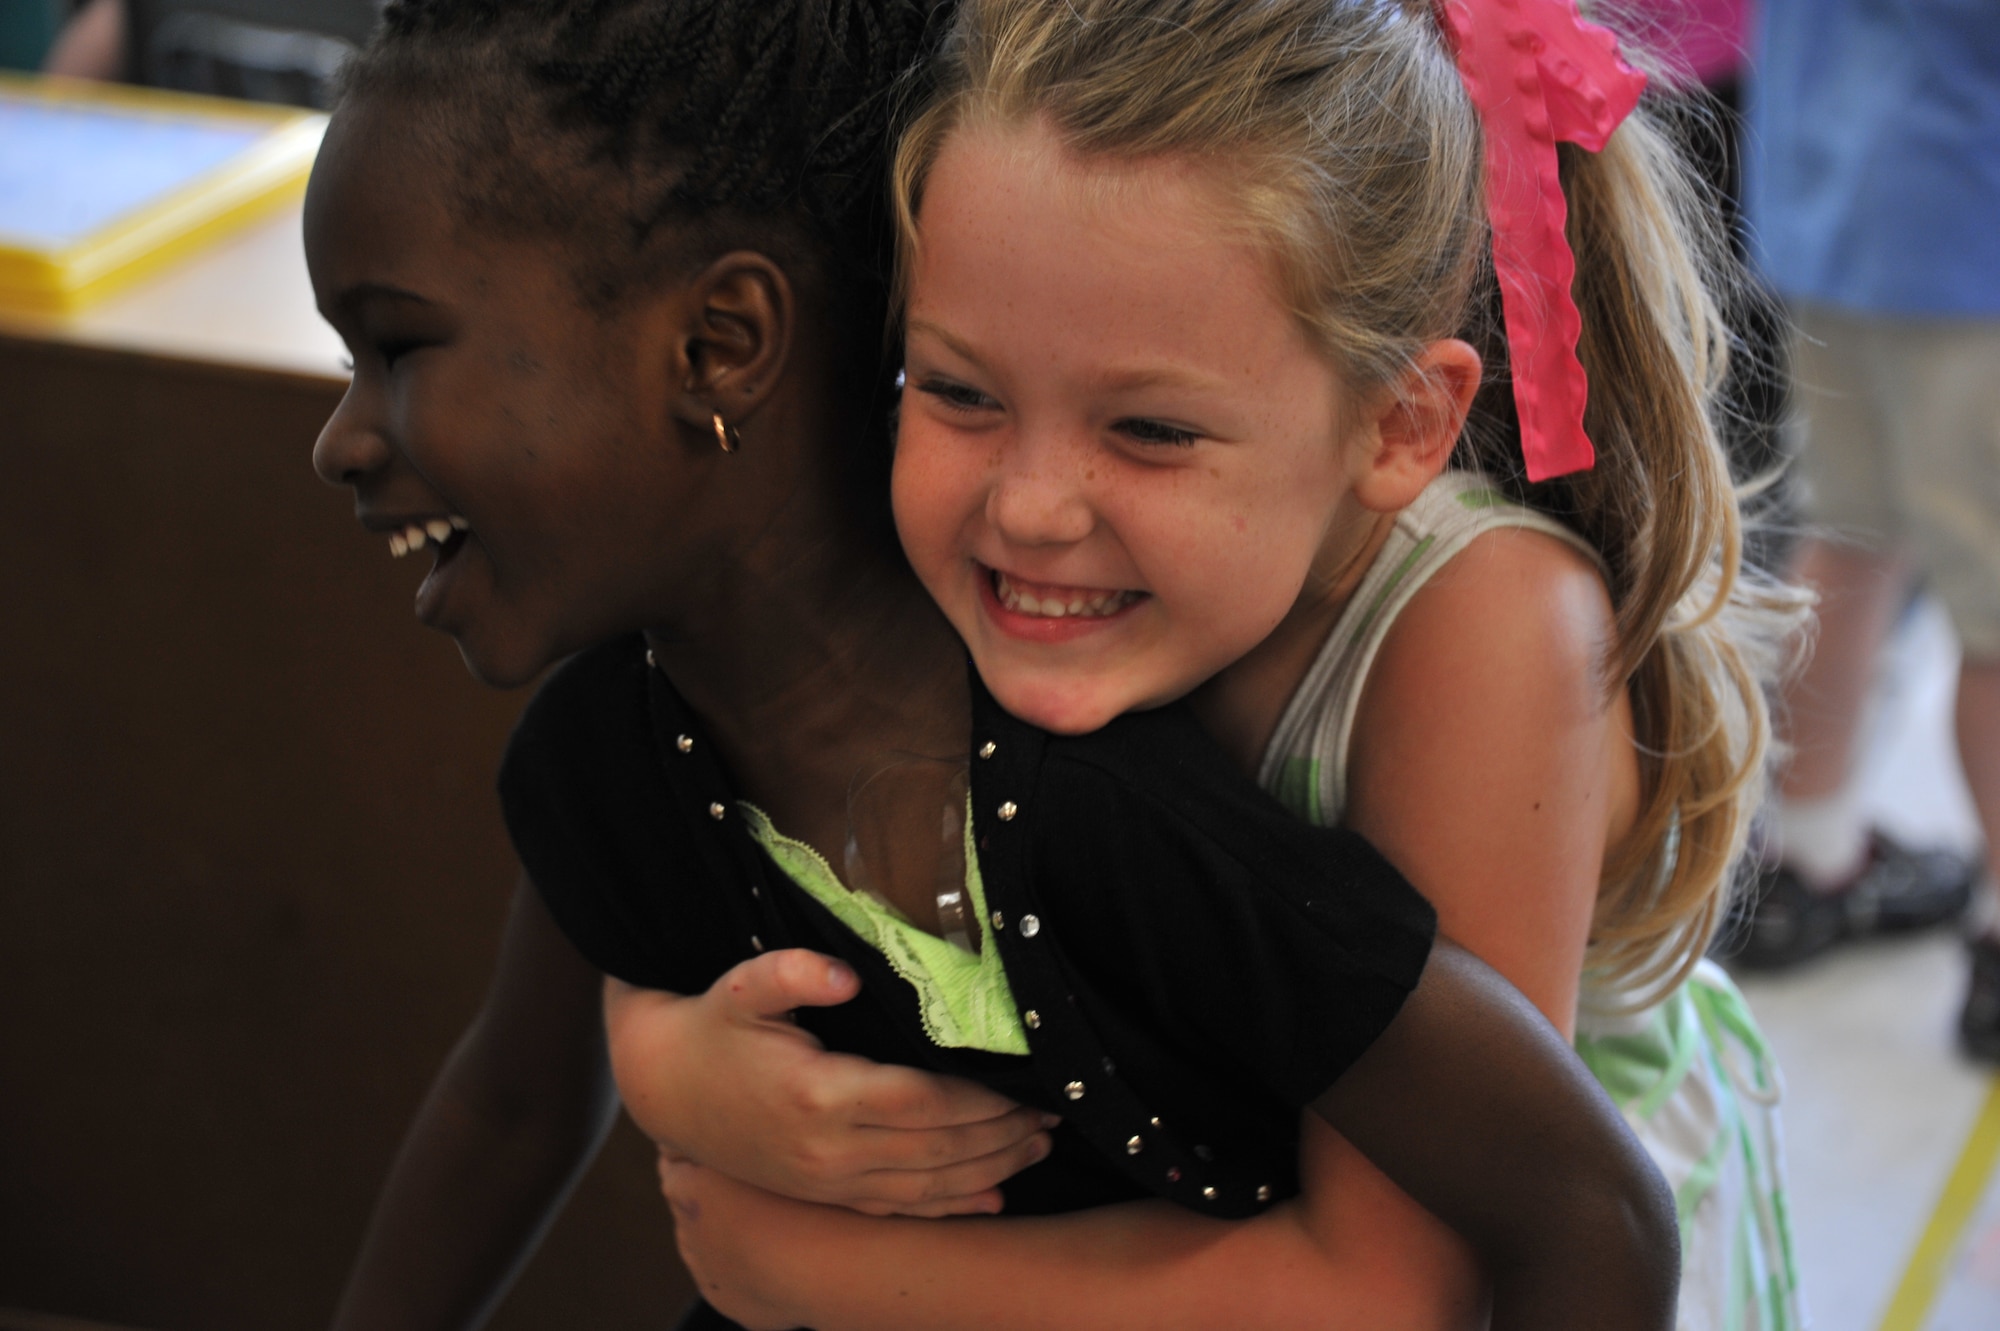 Sarah Caton, right, hugs her best friend Fatou Gueye at the Maxwell Air Force Base child development center, May 20, 2014. Both girls are 4-year-old students at the center. When Fatou, who is from Senegal, first arrived to the CDC she did not speak English, and was not familiar with American customs. Thanks to Sarah Fatou is now fluent in English and comfortable with cultural norms. (U.S. Air Force photo by Staff Sgt. Natasha Stannard)